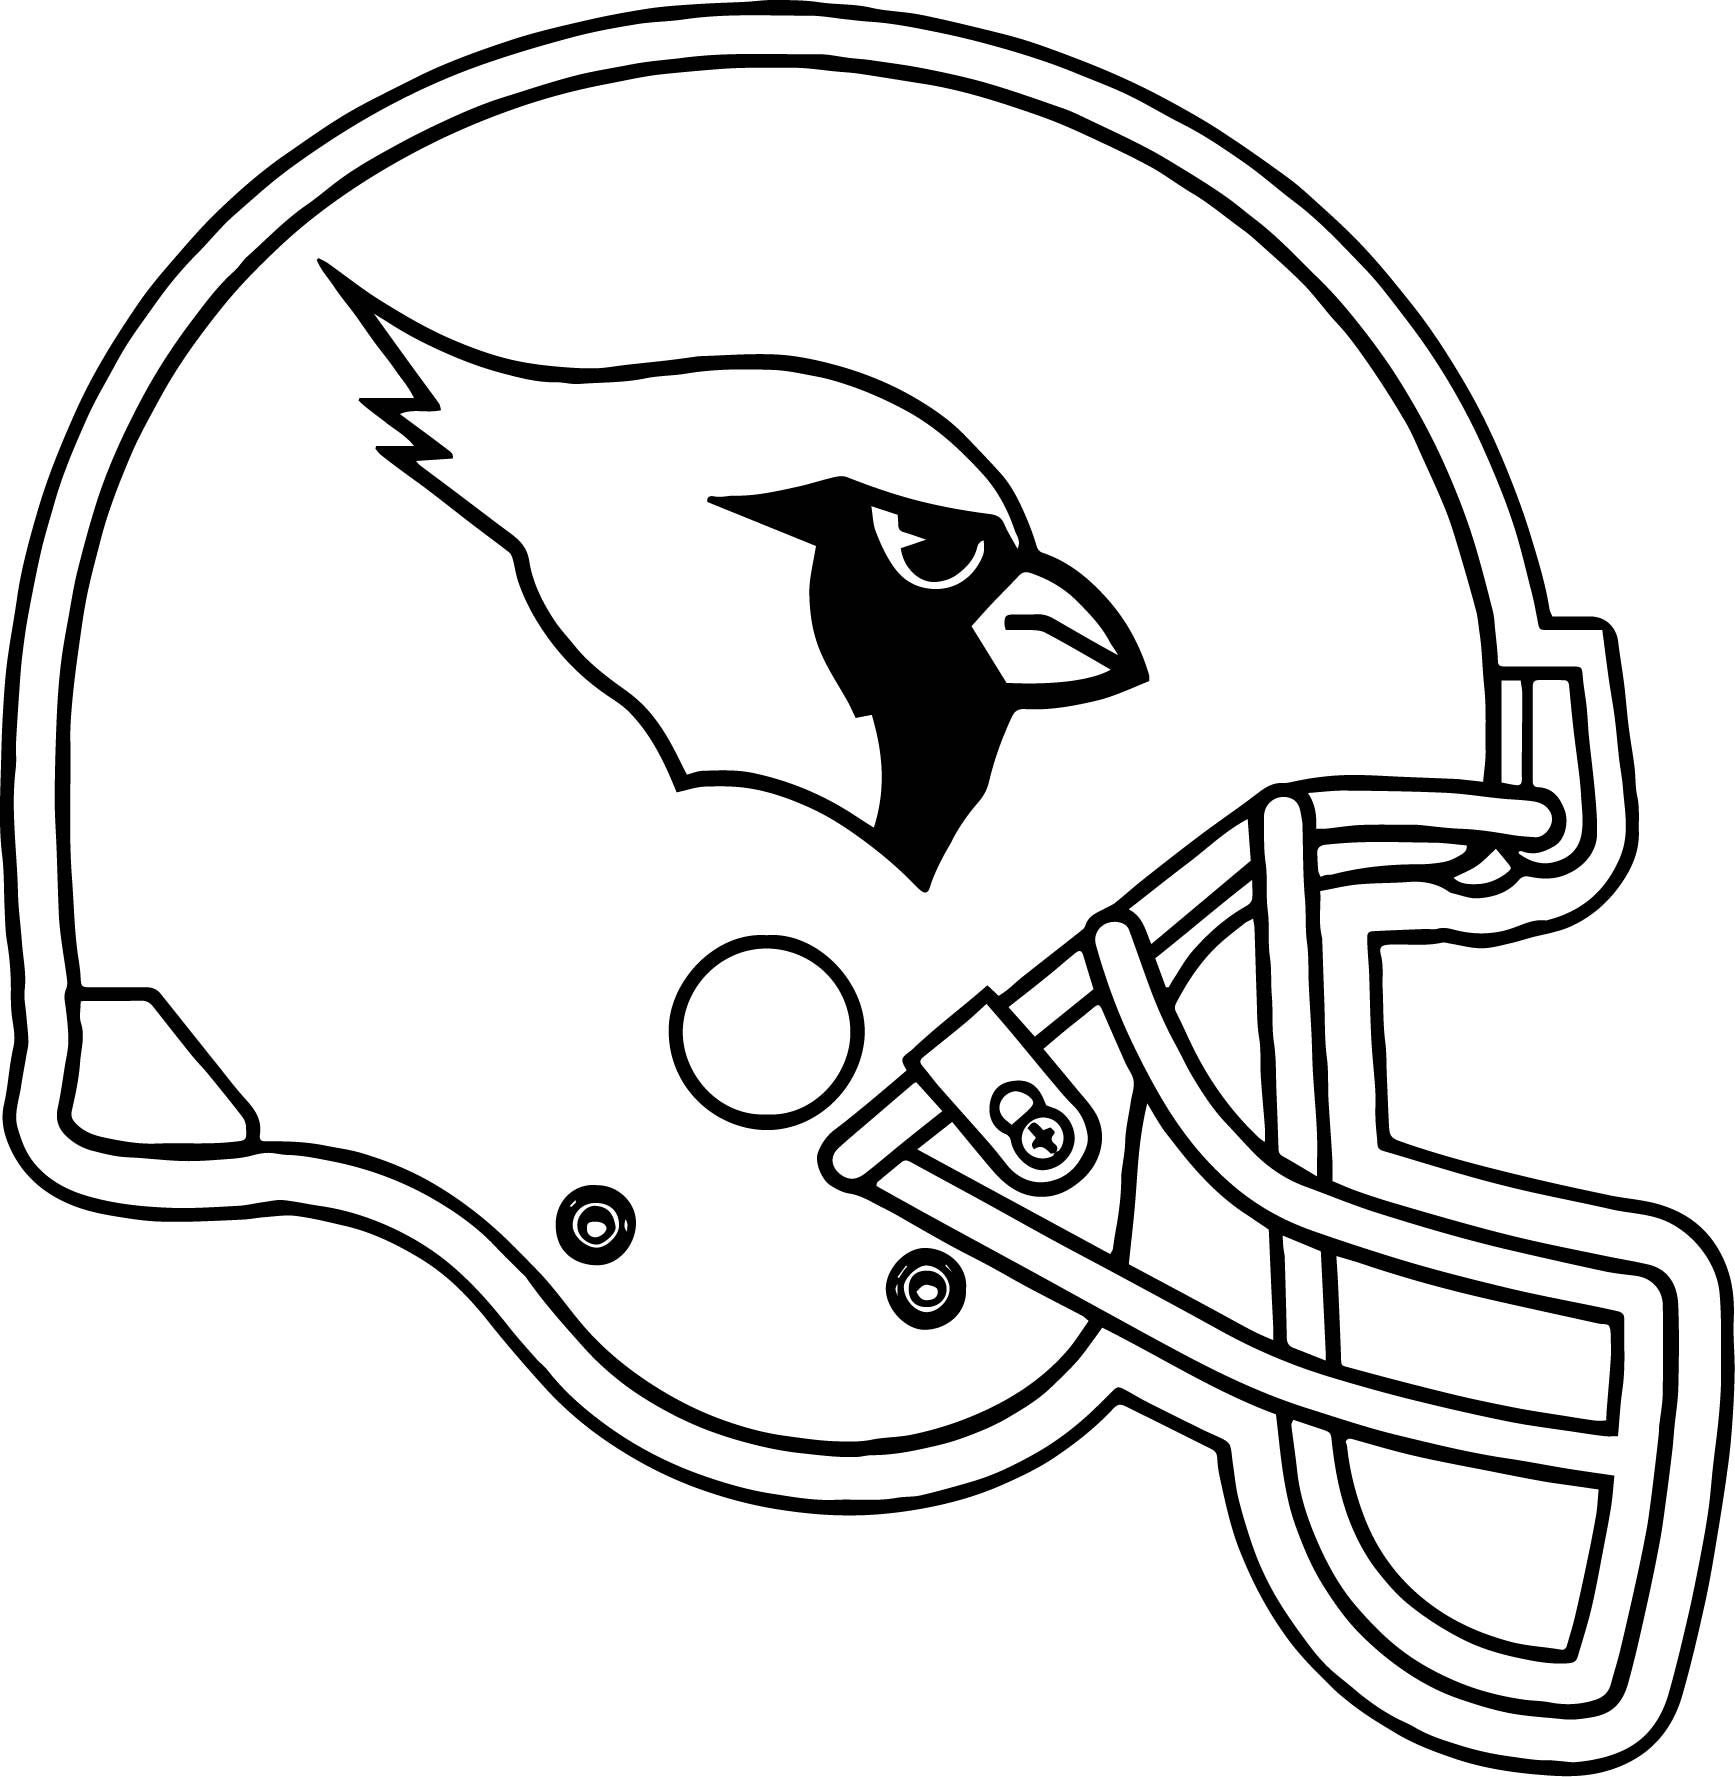 Football Helmet Coloring Pages – coloring.rocks!